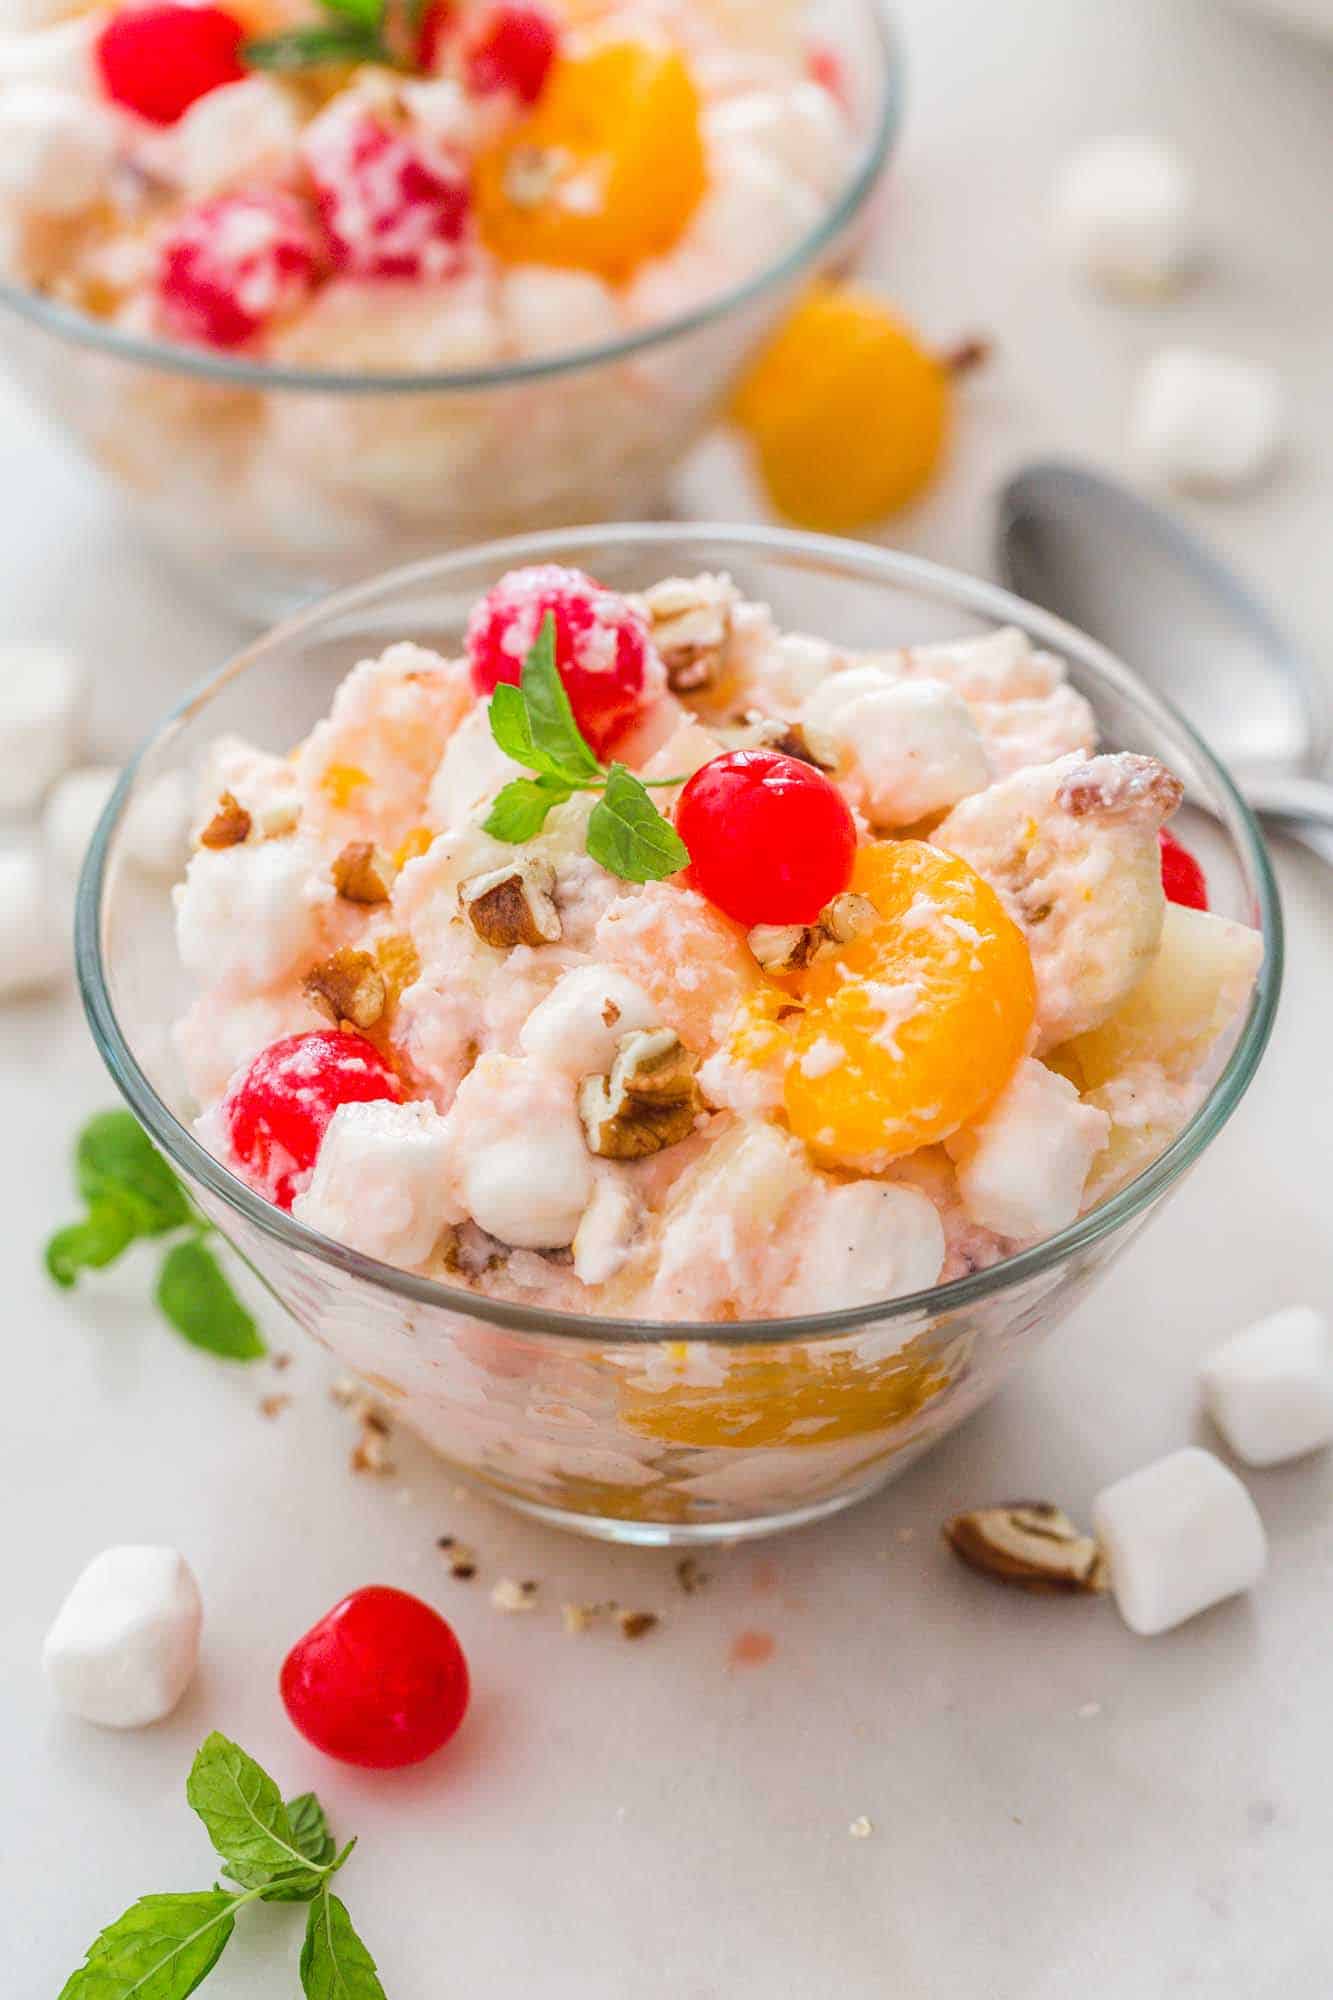 Ambrosia Salad served in glass bowls individual servings, garnished with mint leaves and maraschino cherries